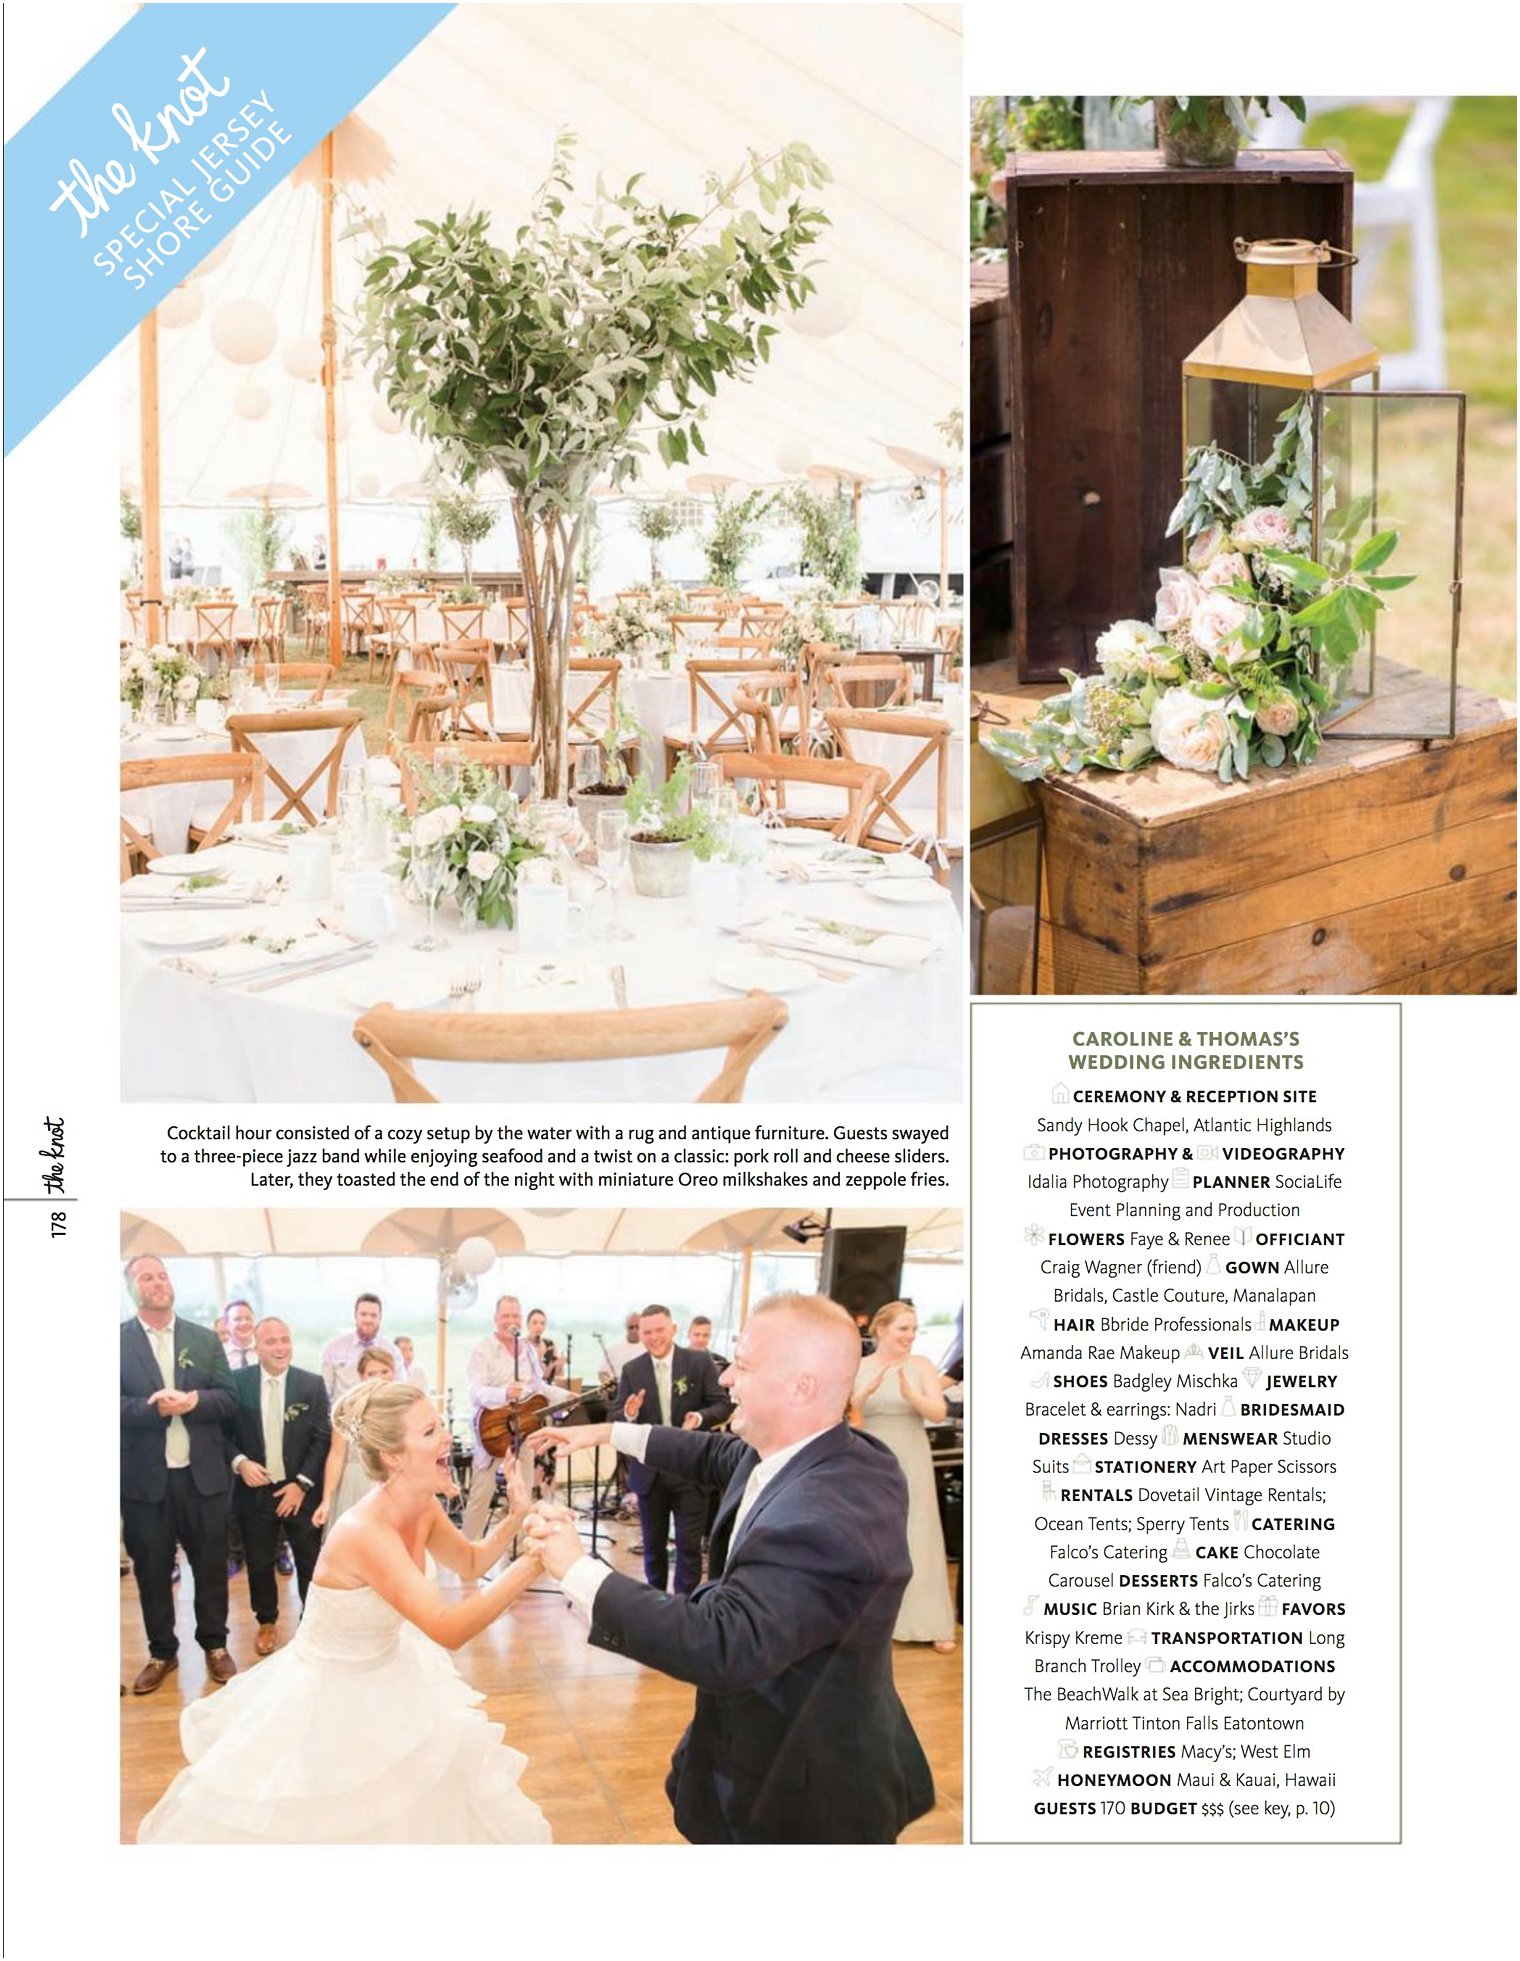 Published in The Knot NJ Spring/Summer 2018